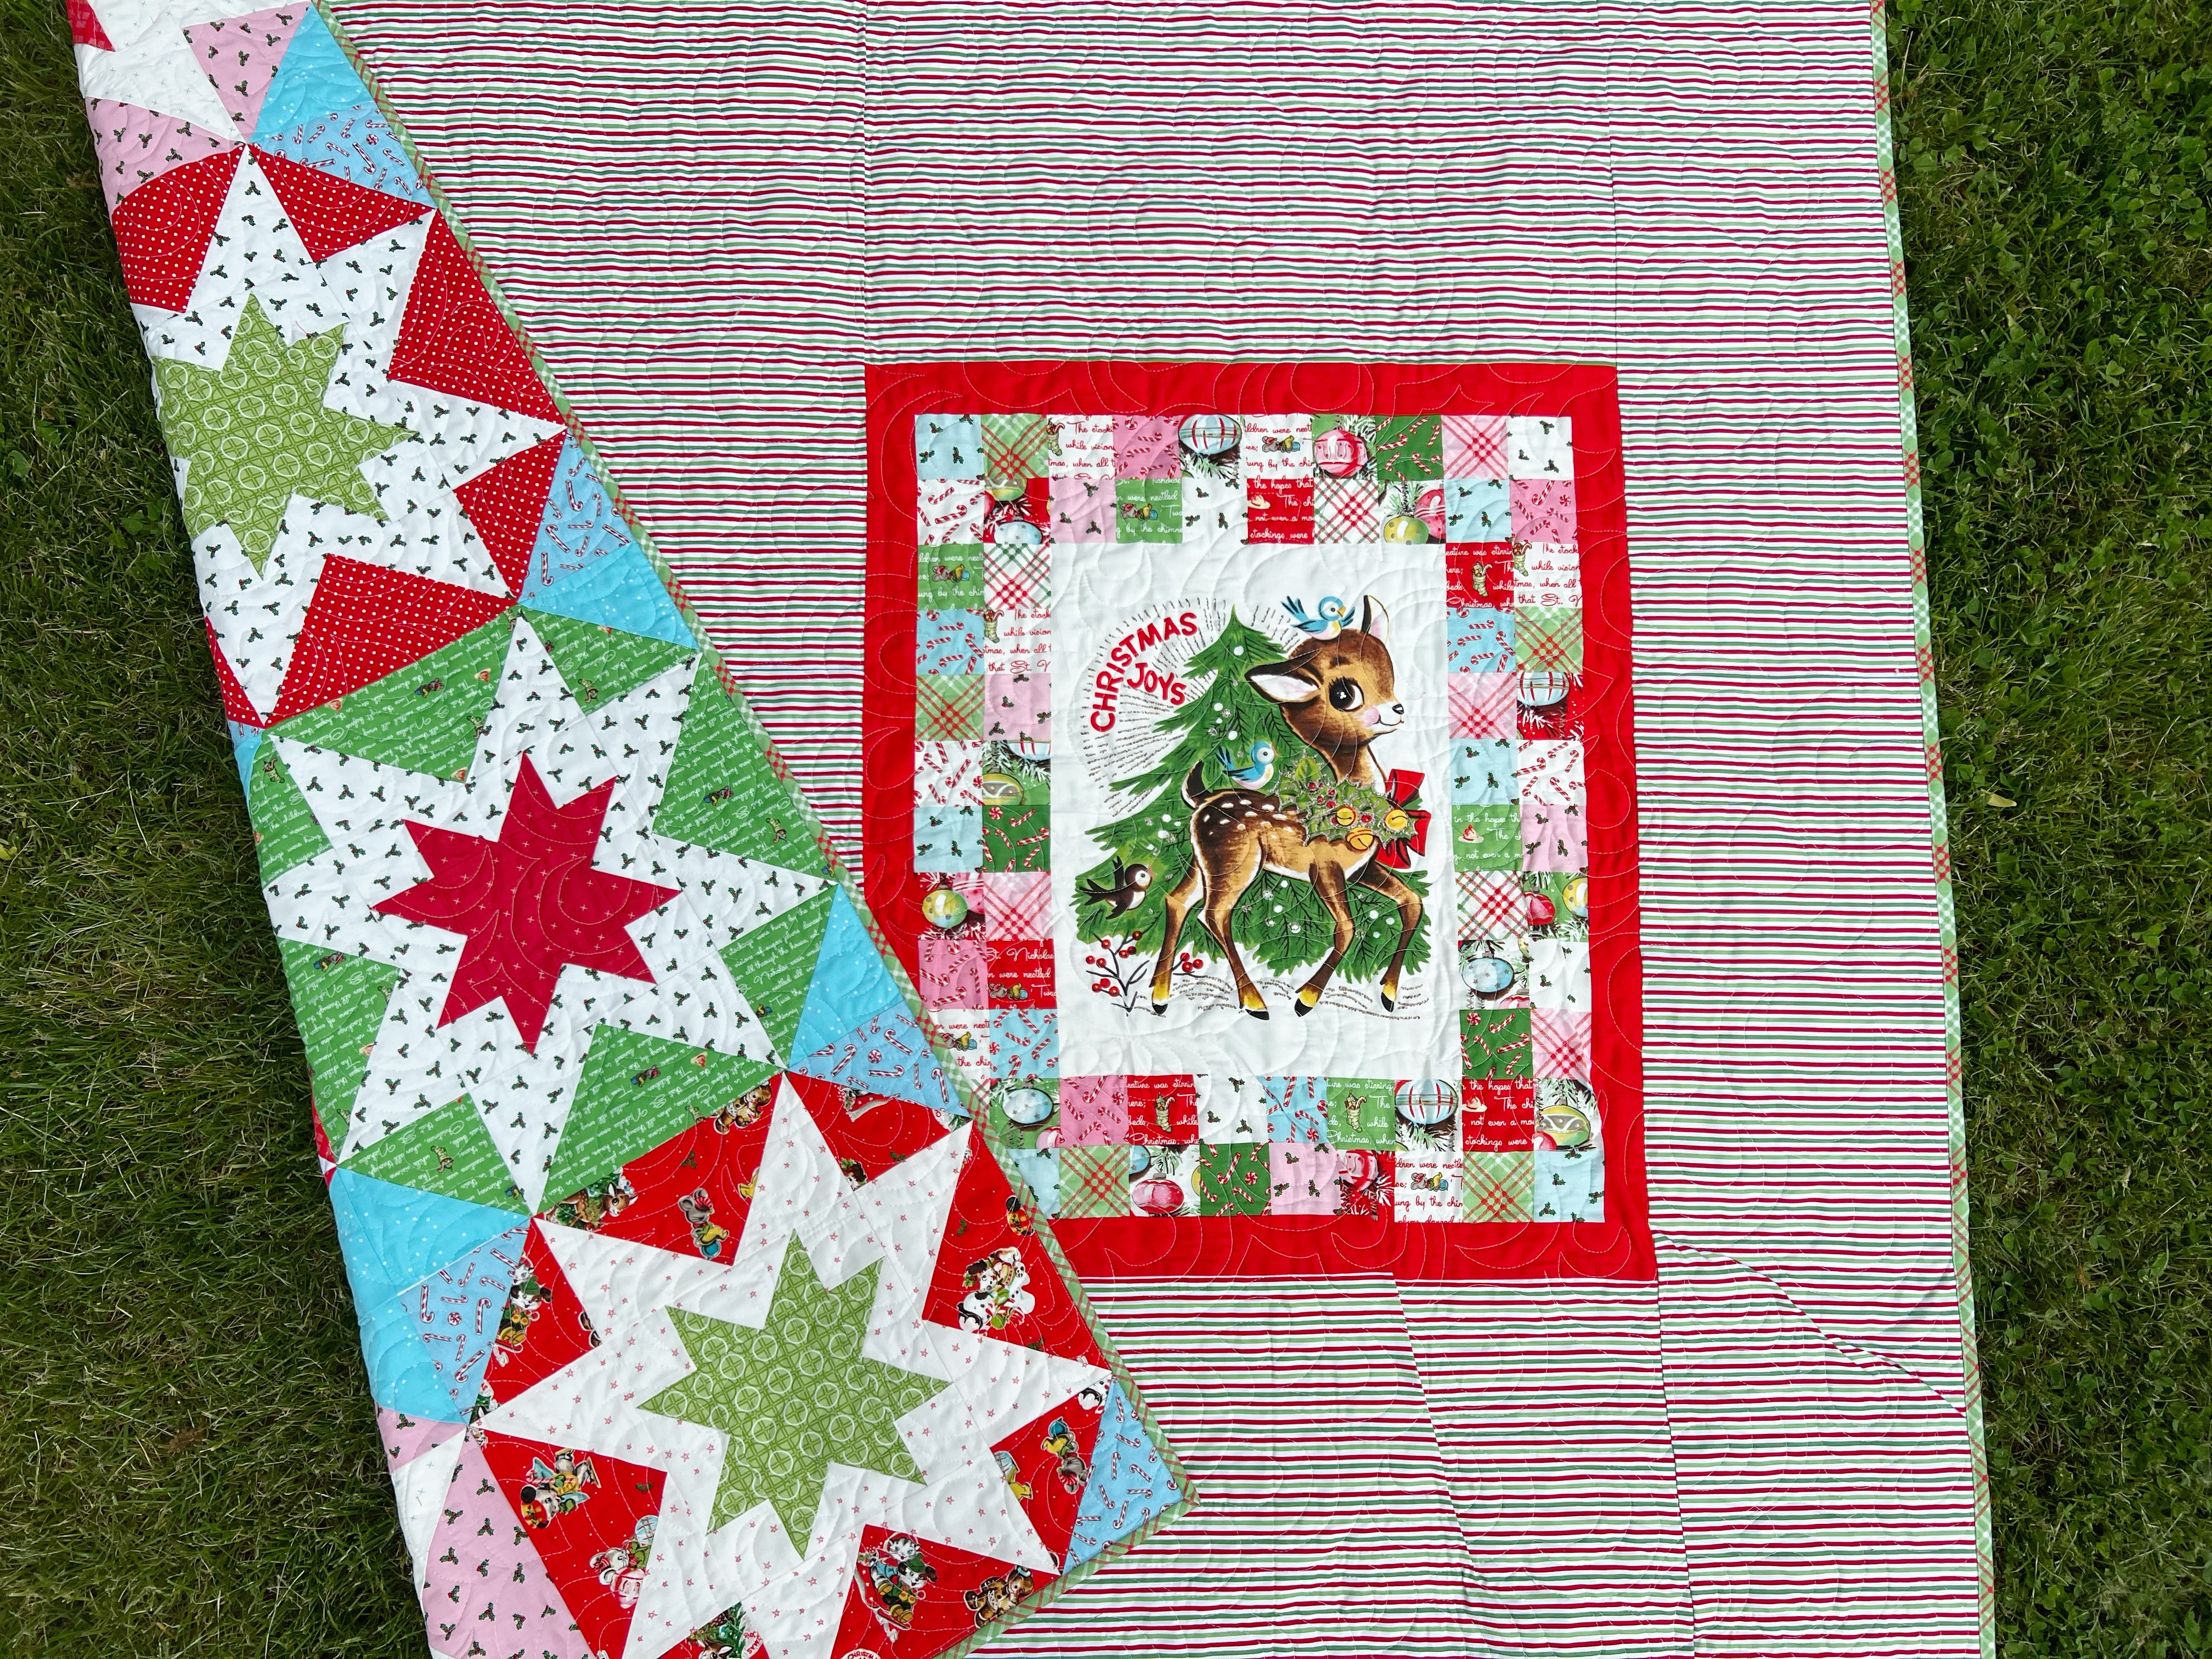 Riley Blake Designs – The Quilter's Crossing